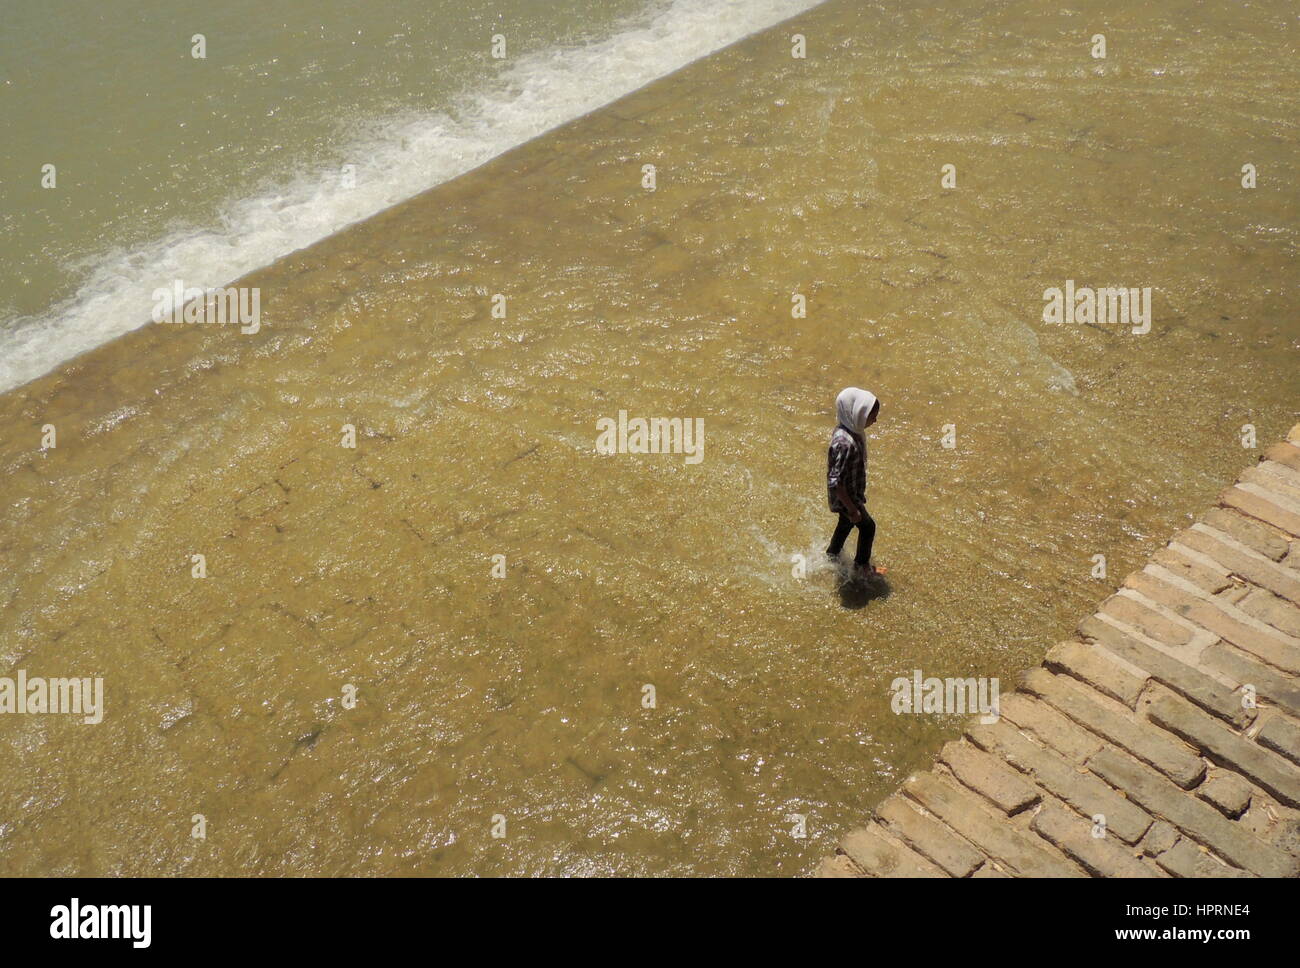 Muslim girl goes against the flow and walks alone challenging the waters of the Zayandeh river by the Si o seh pol bridge - Isfahan, Iran Stock Photo